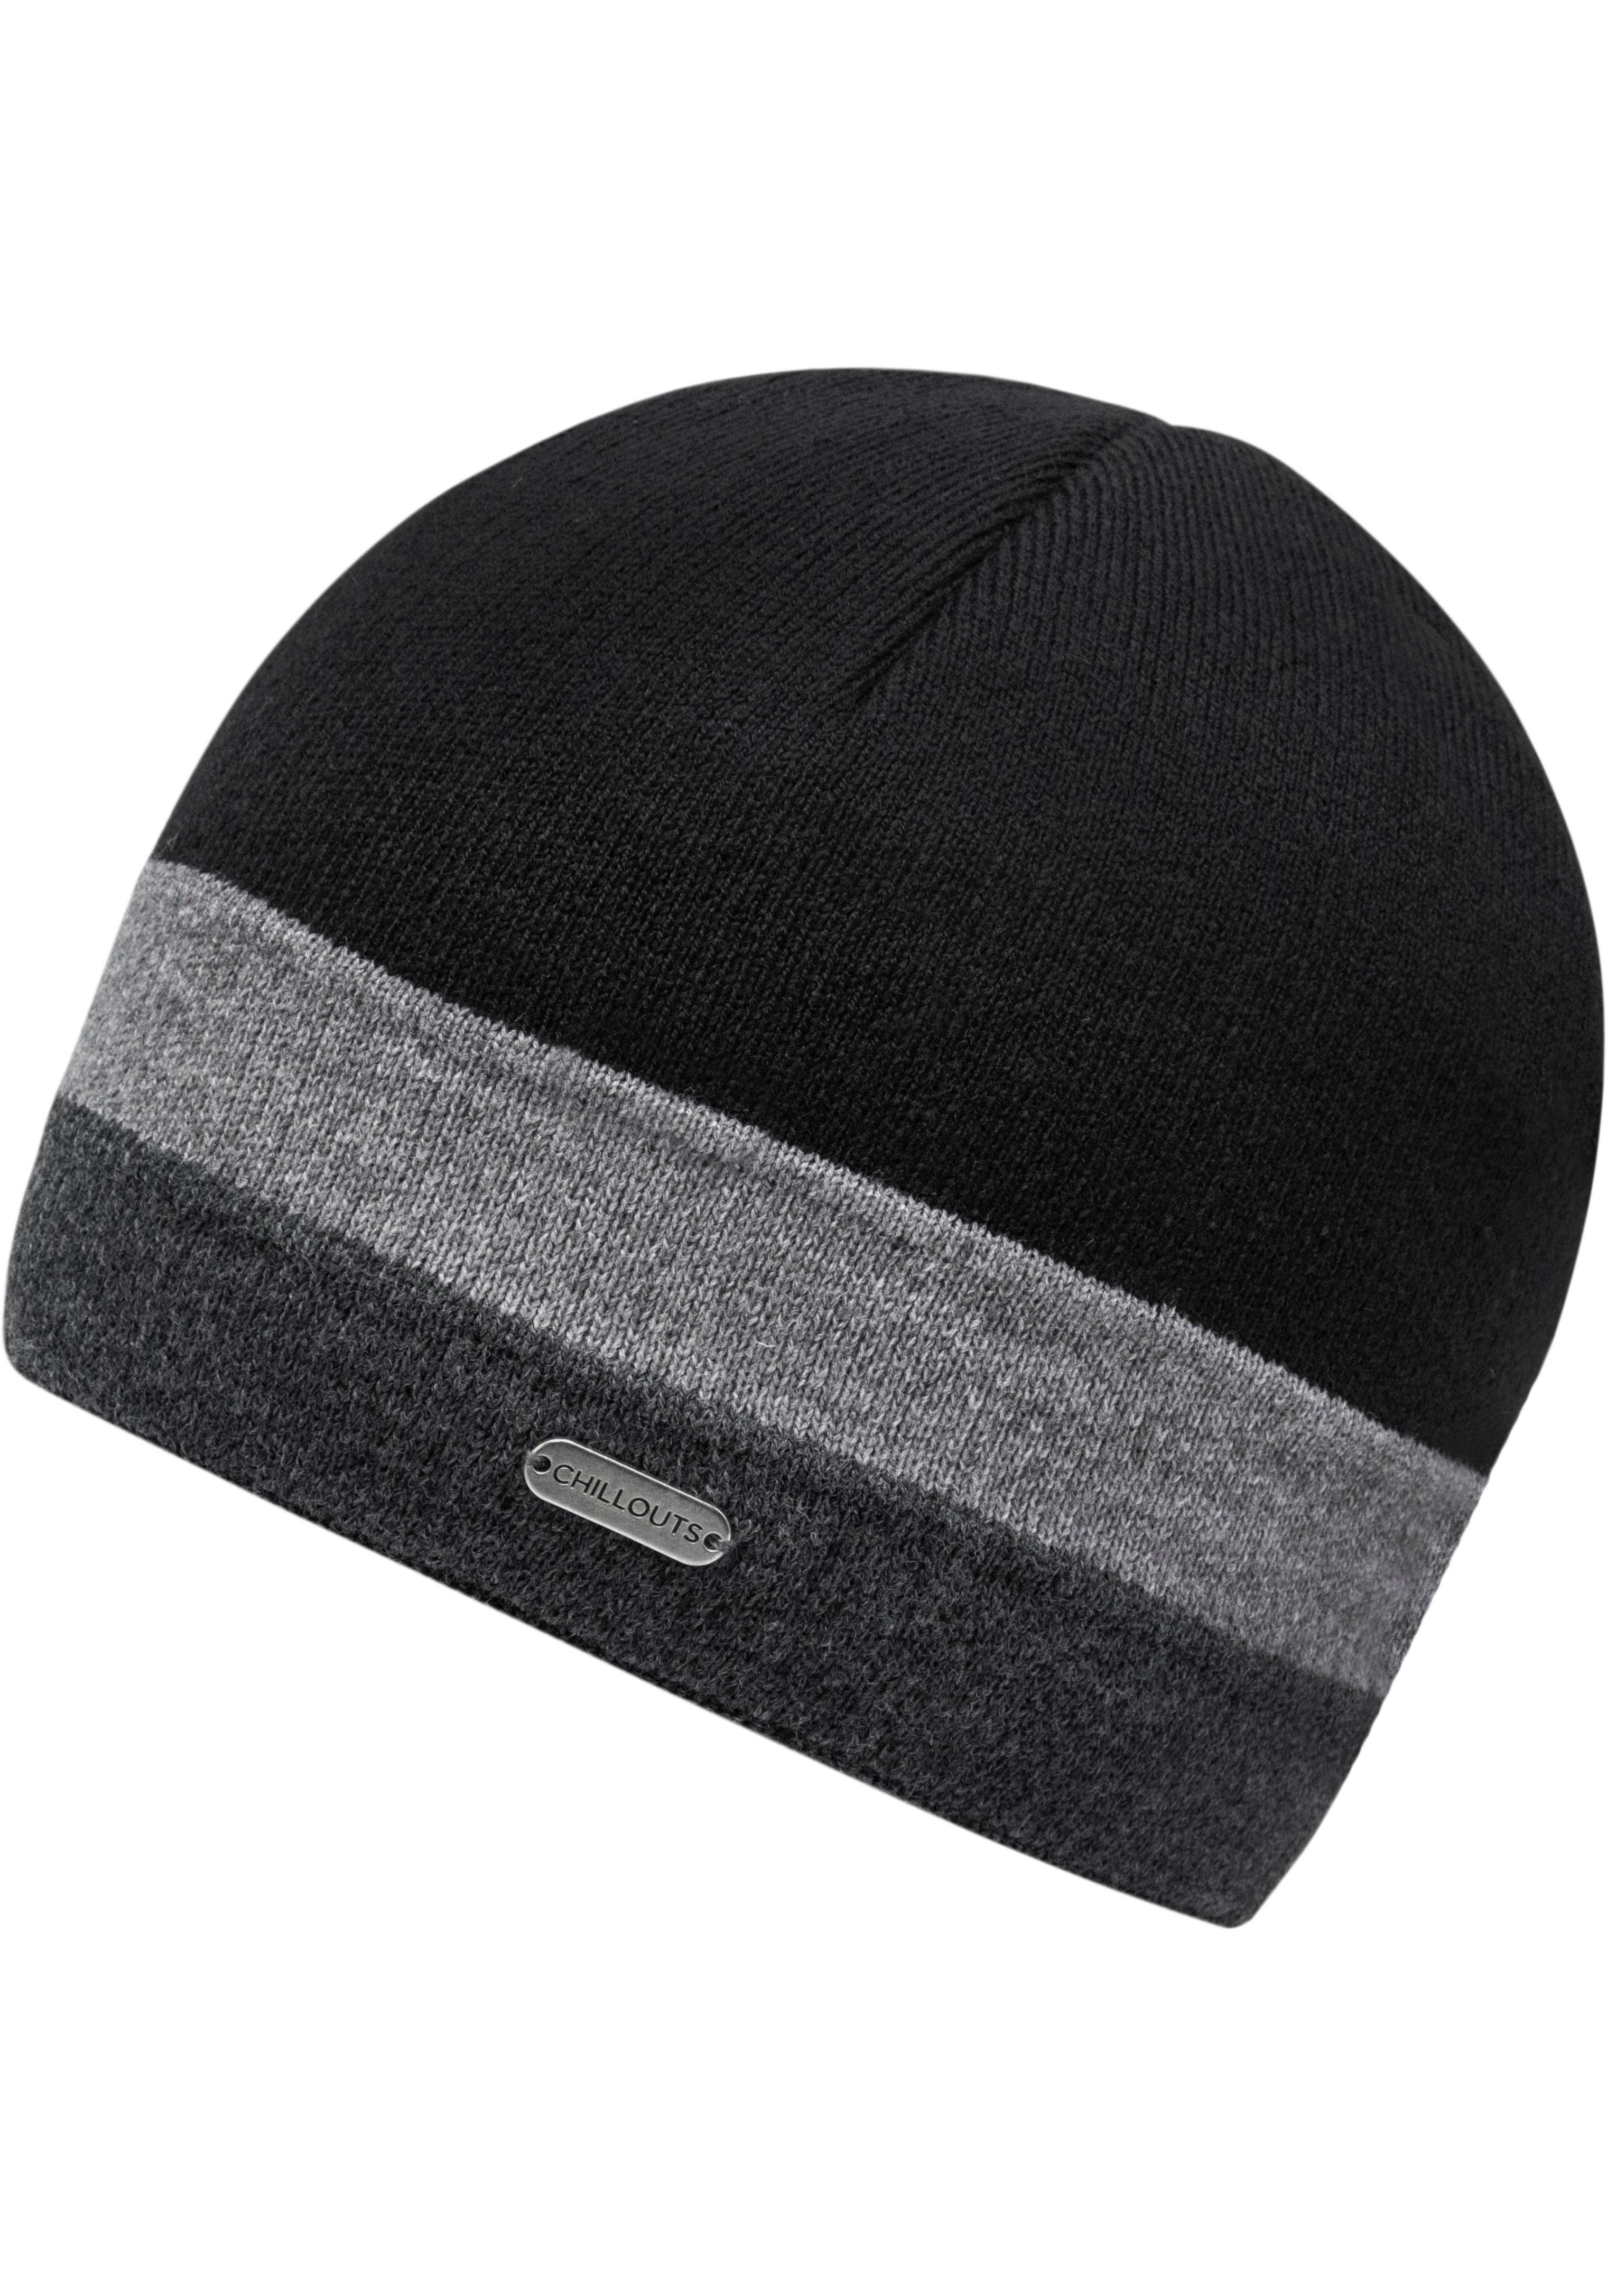 chillouts Beanie Johnny Johnny Hat Hat black